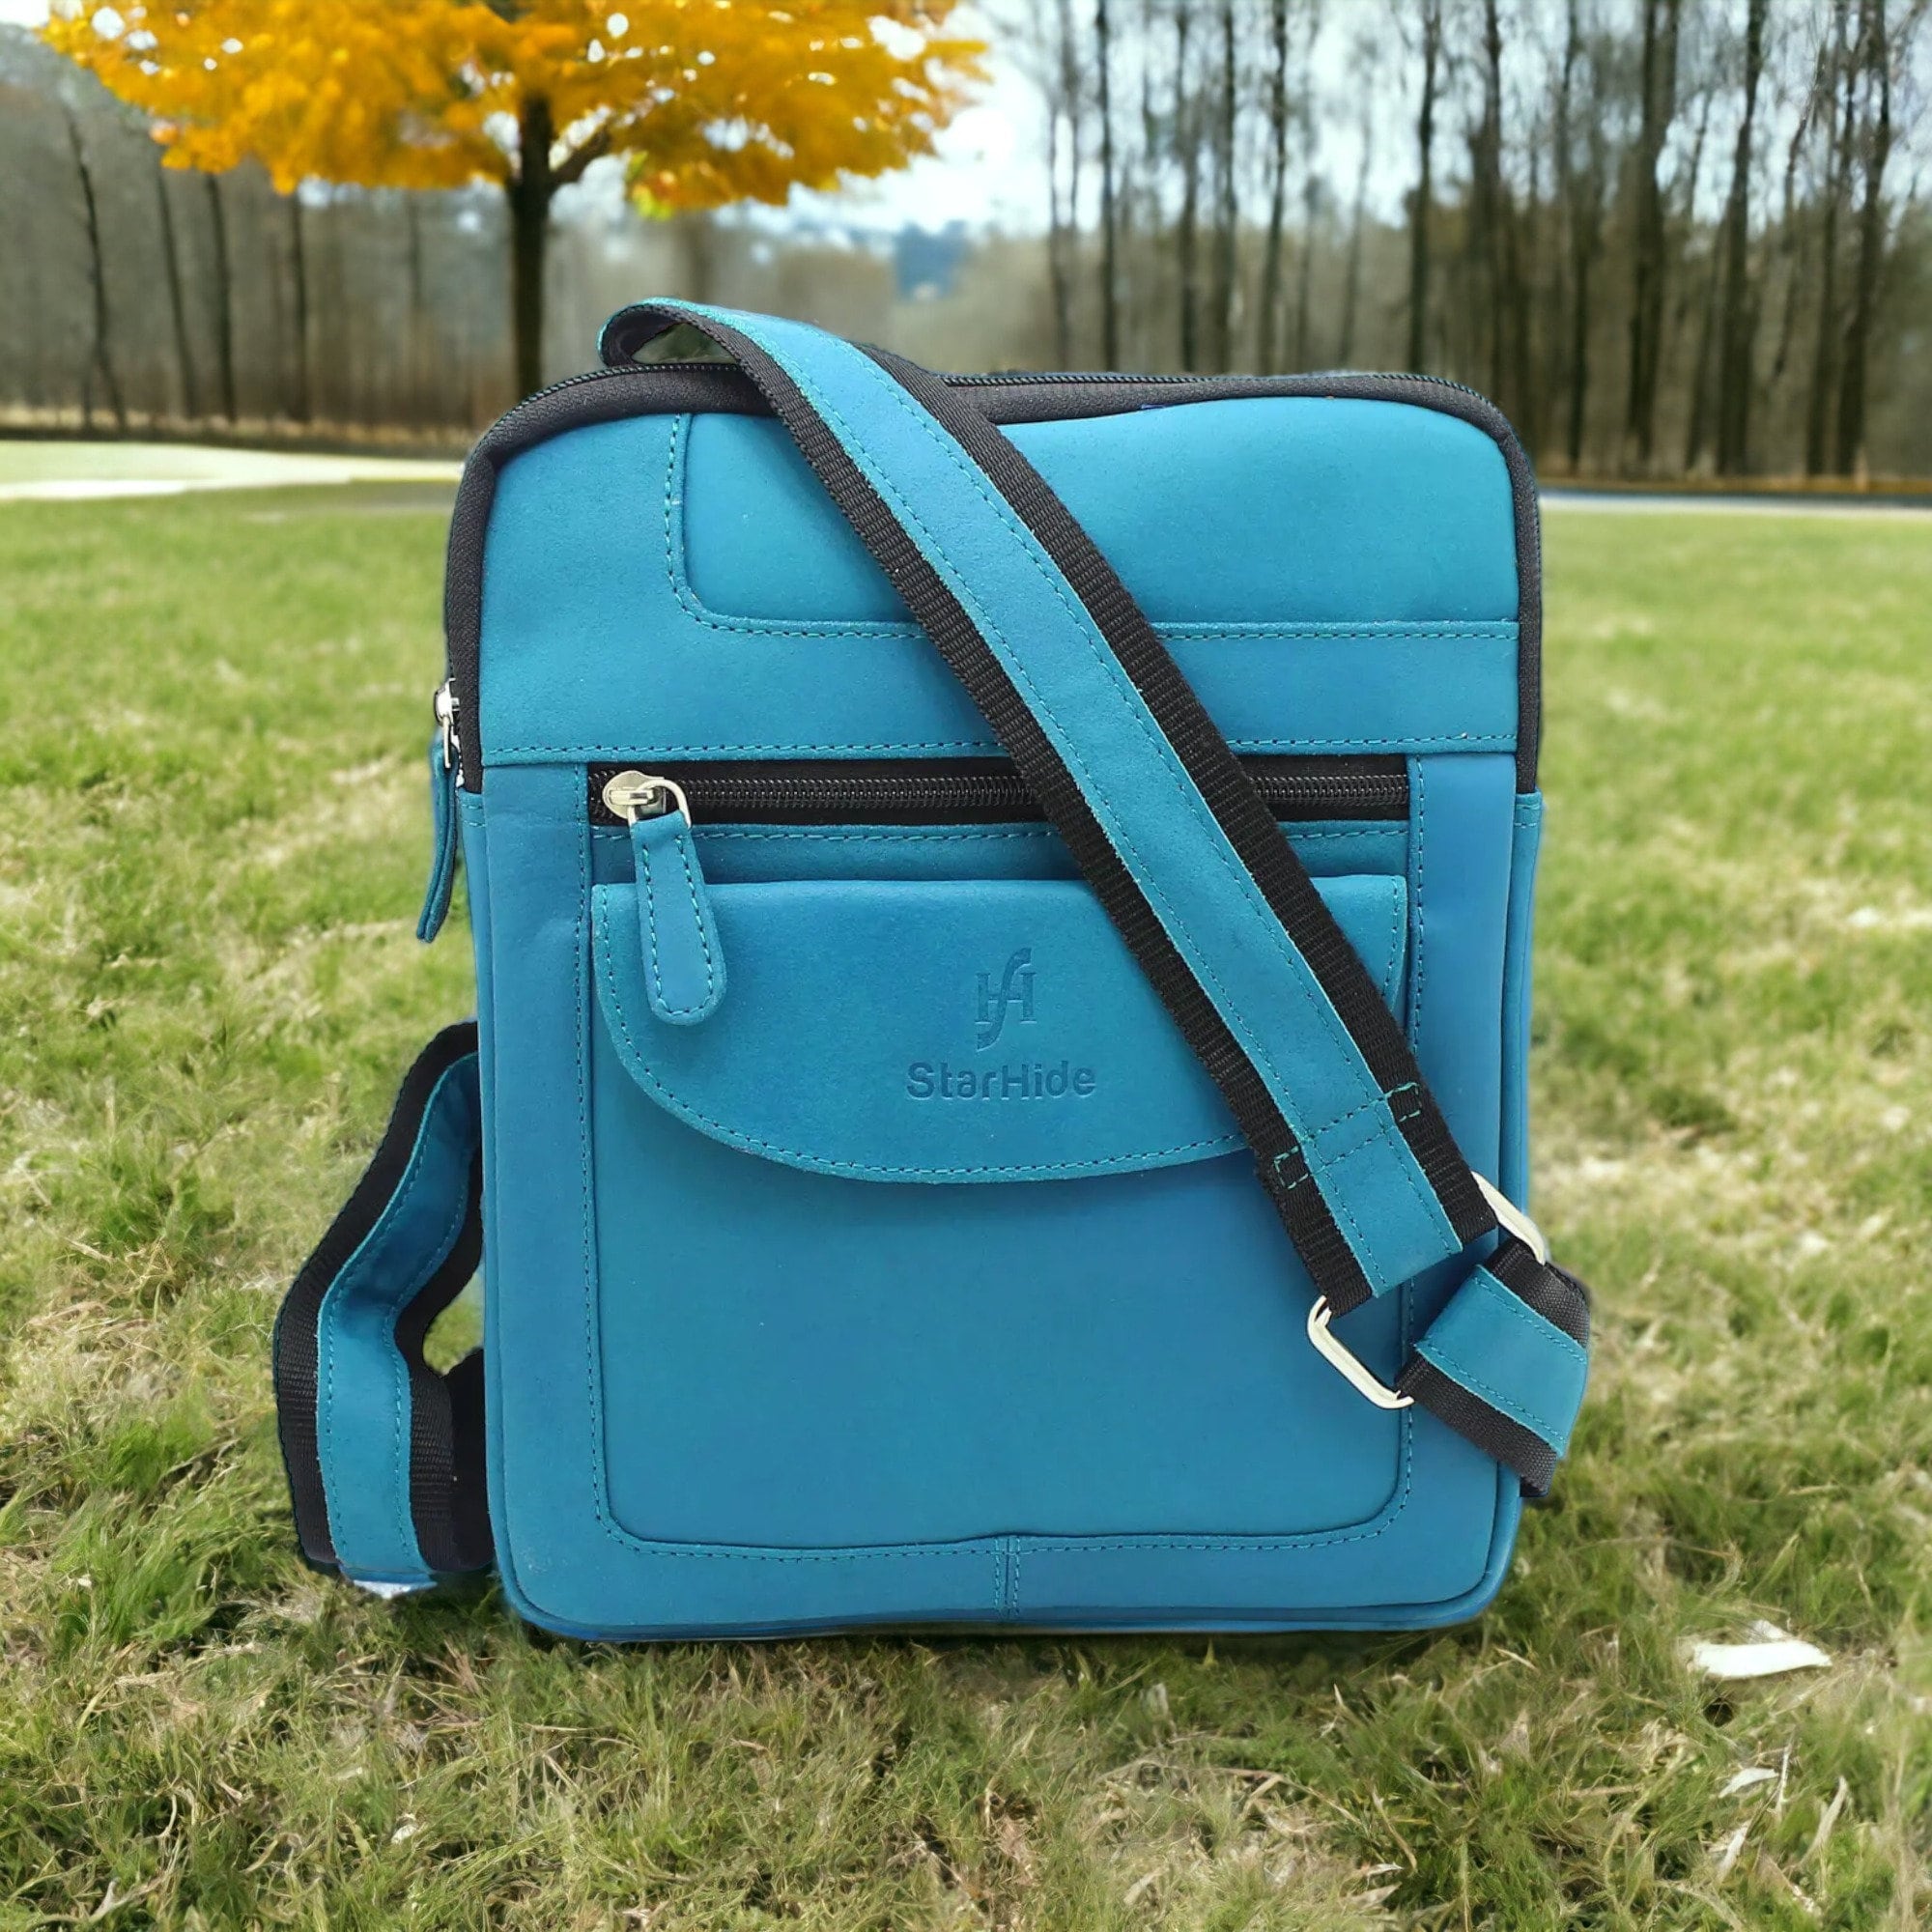 Buy Mens Womens Cross Over Bag Handmade Soft Sky Blue Real Leather Online  in India 